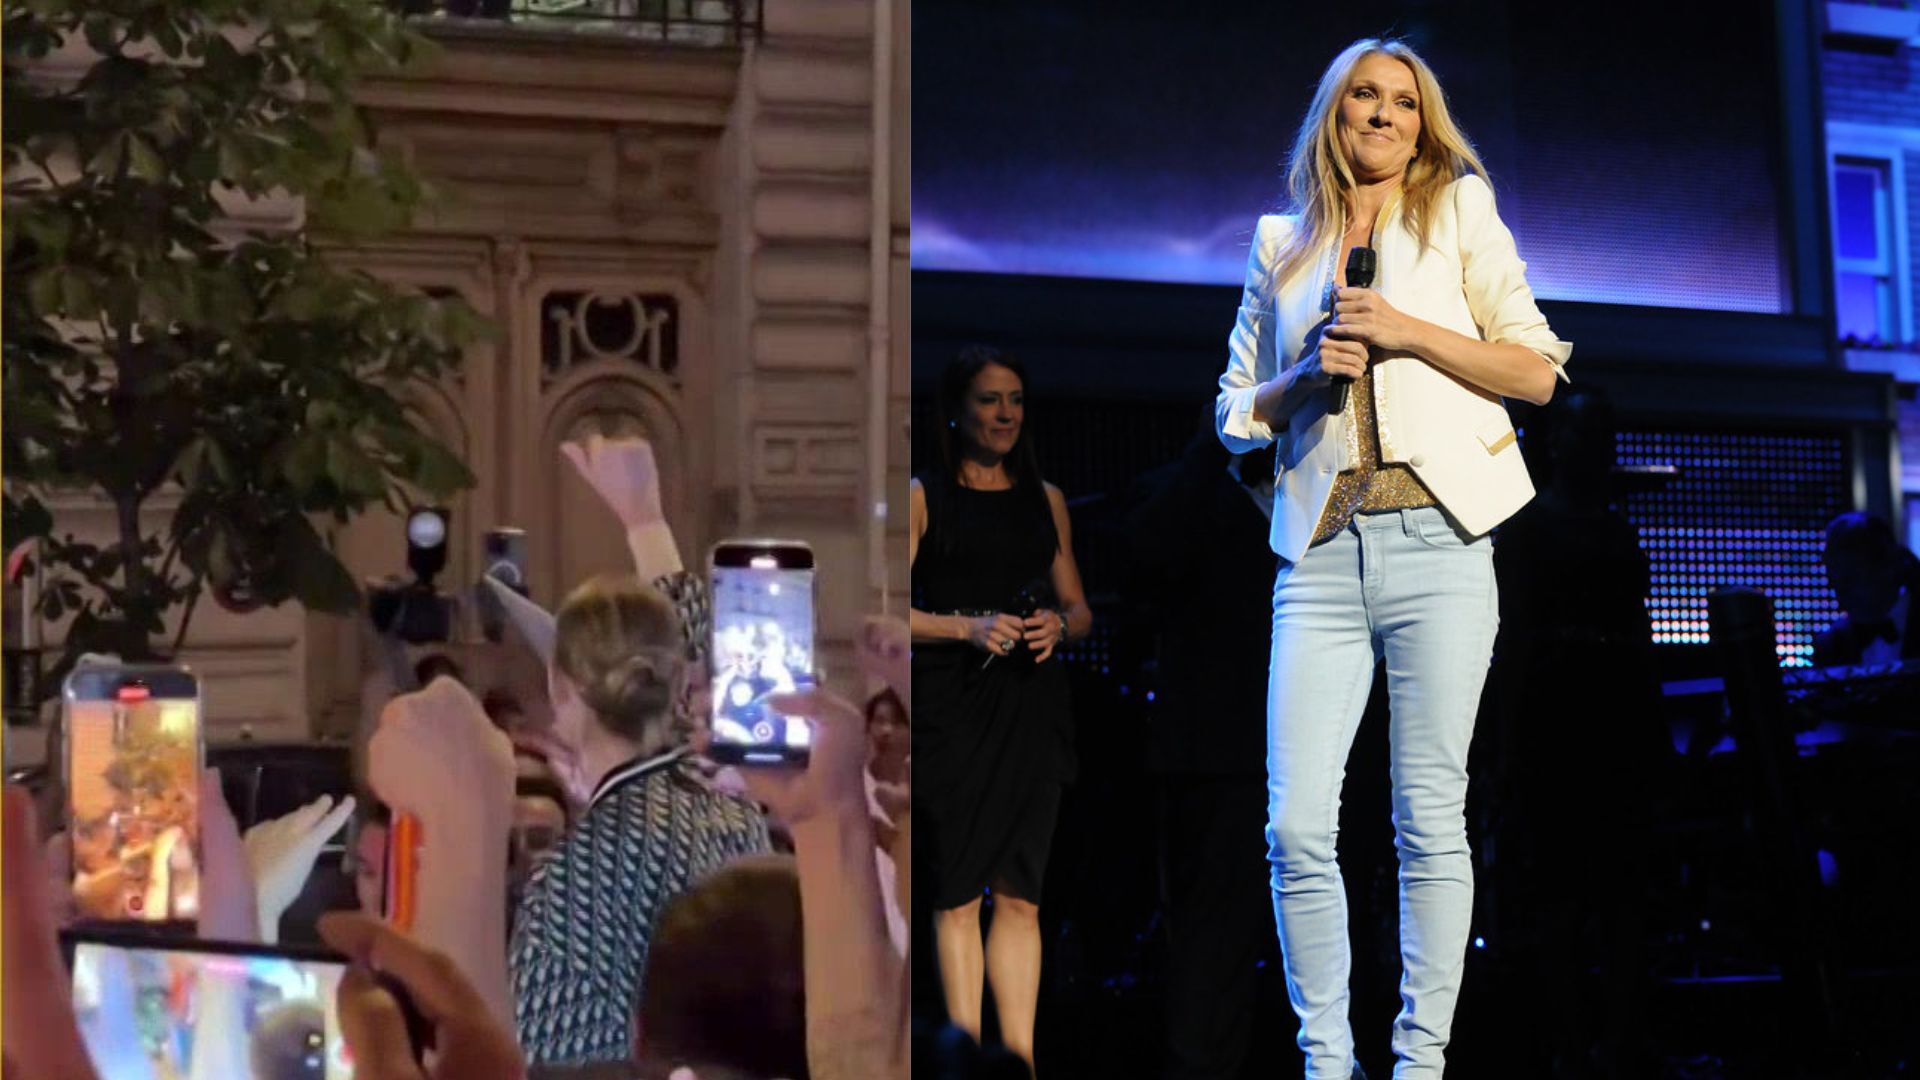 Celine Dion went on the roof of a vehicle to see her Paris fans